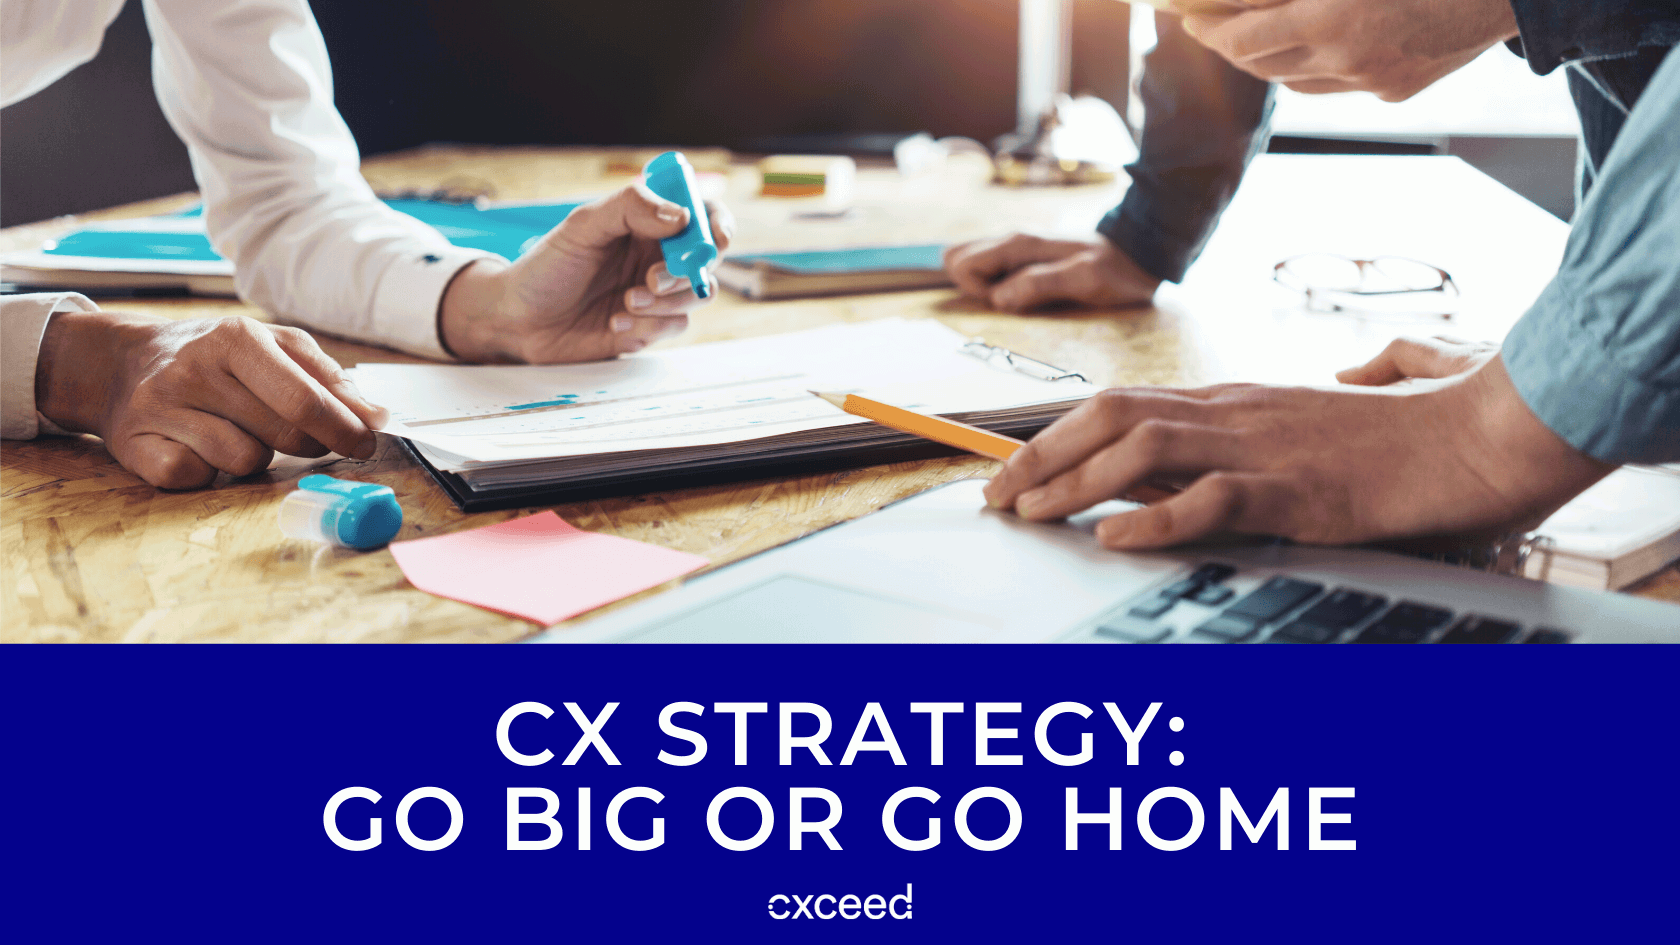 CX Strategy - Go Big or Go Home